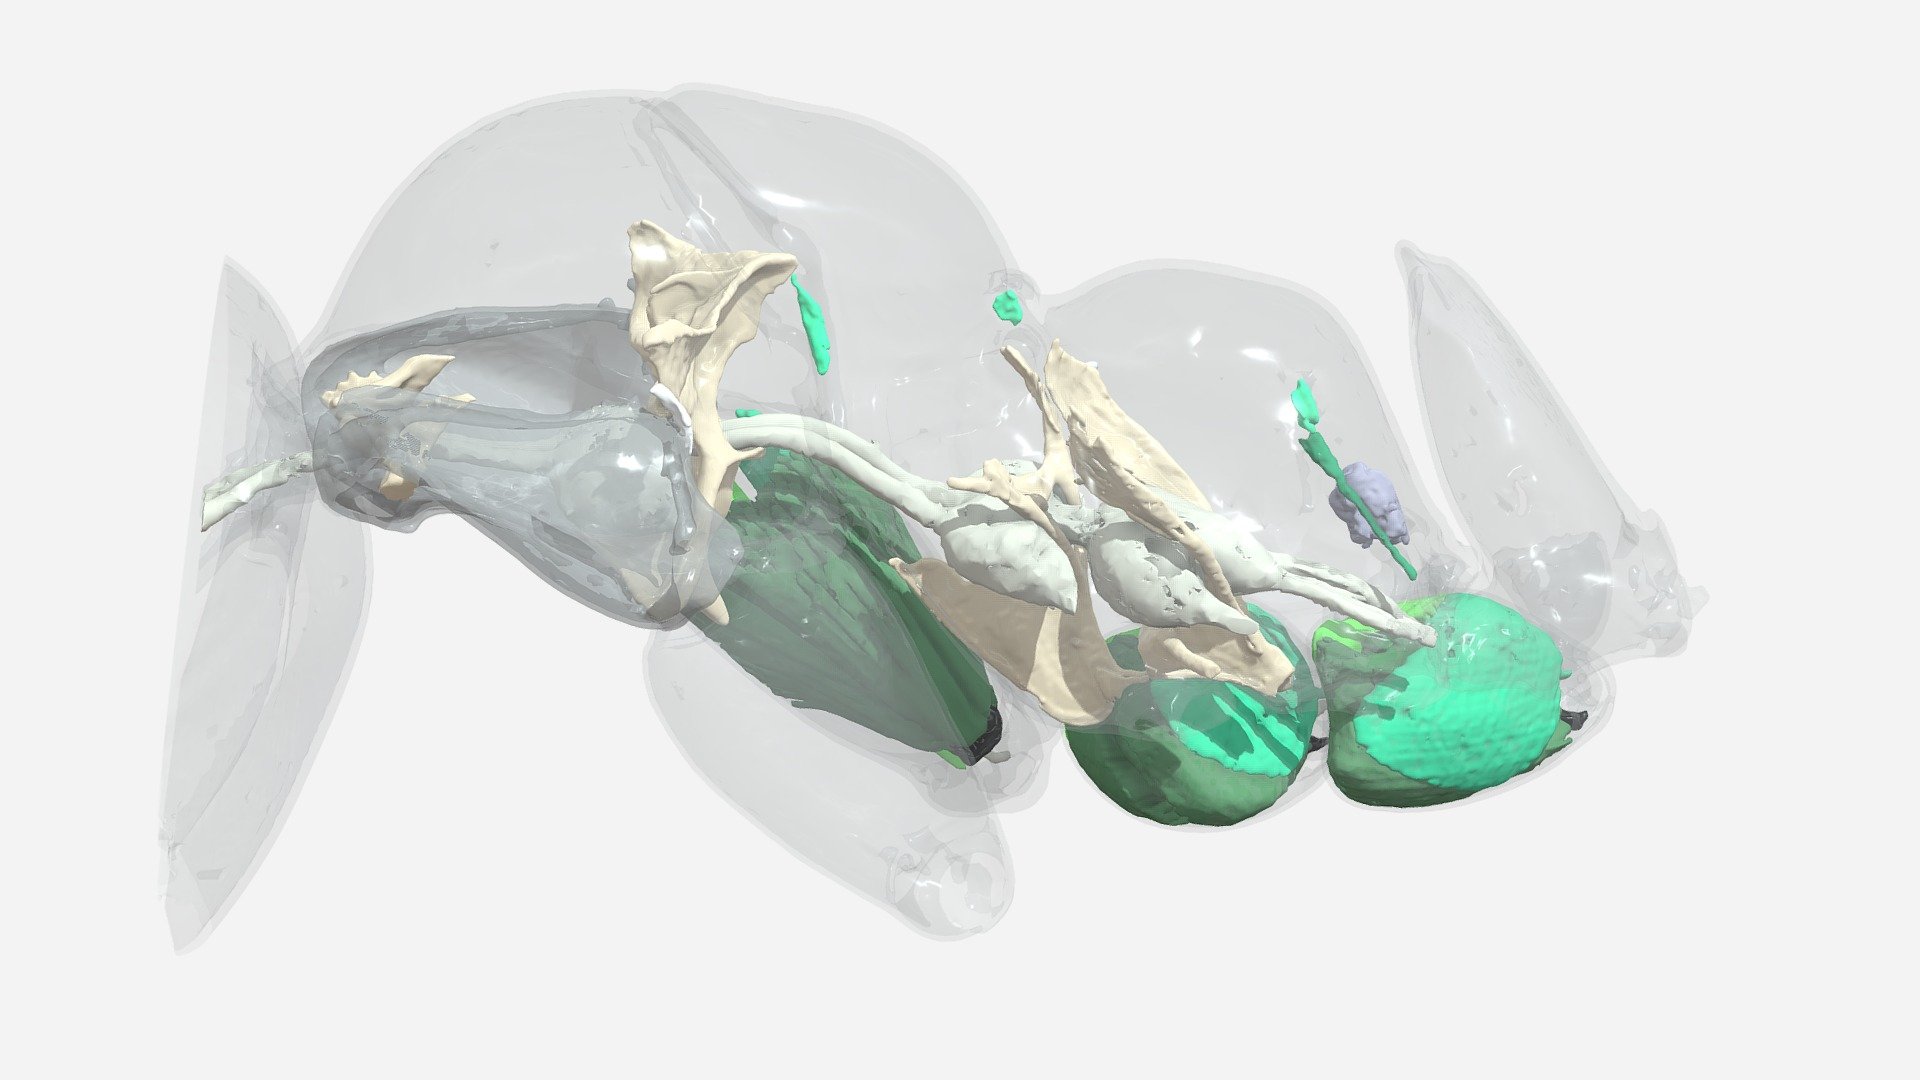 3D model of the mesosomal skeletomuscular system of Formica rufa published in: https://doi.org/10.1093/isd/ixac002.
Coxo-trochanetral muscles, spiracular muscles and endoskeletal structures are illustrated and annotated.   The specimen is located at Okinawa Institute of Science and Technology, Japan: CASENT0741323. Raw data available from: https://doi.org/10.5061/dryad.pnvx0k6nw Okinawa Institute of Science and Technology Graduate University - Model 2 - 3D model by Economolab (@arilab) 3d model